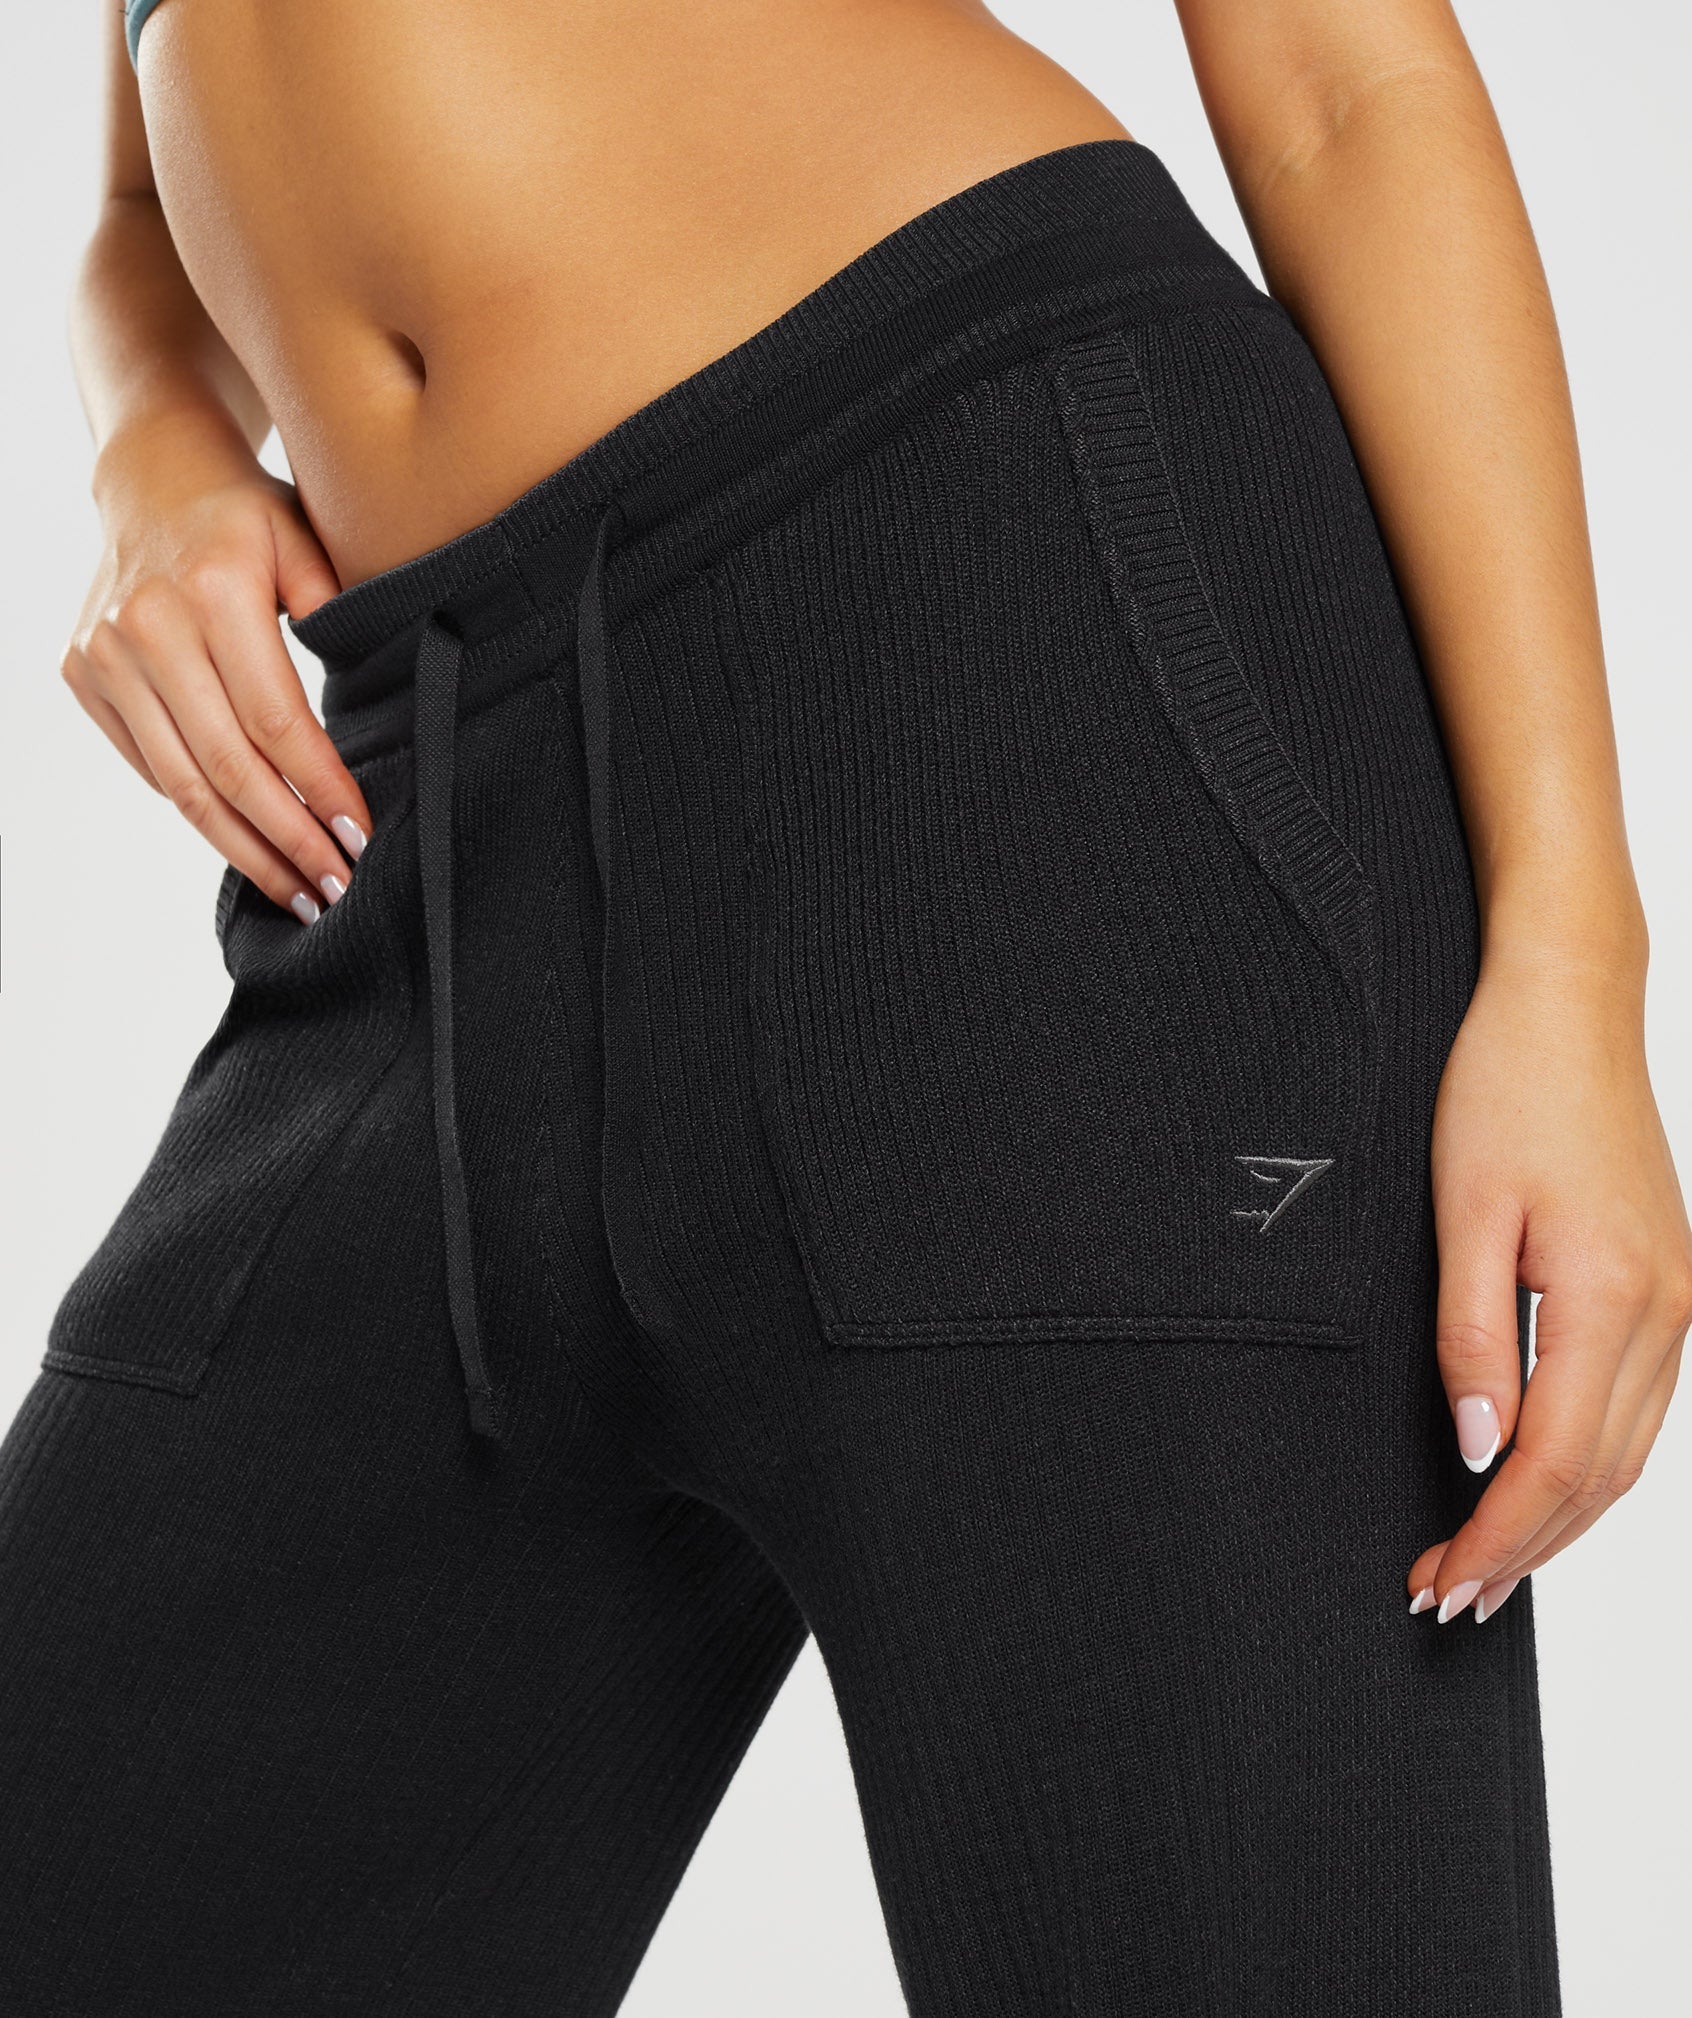 Gymshark Women's Pause Joggers, Medium Gray - $69 New With Tags - From Kat